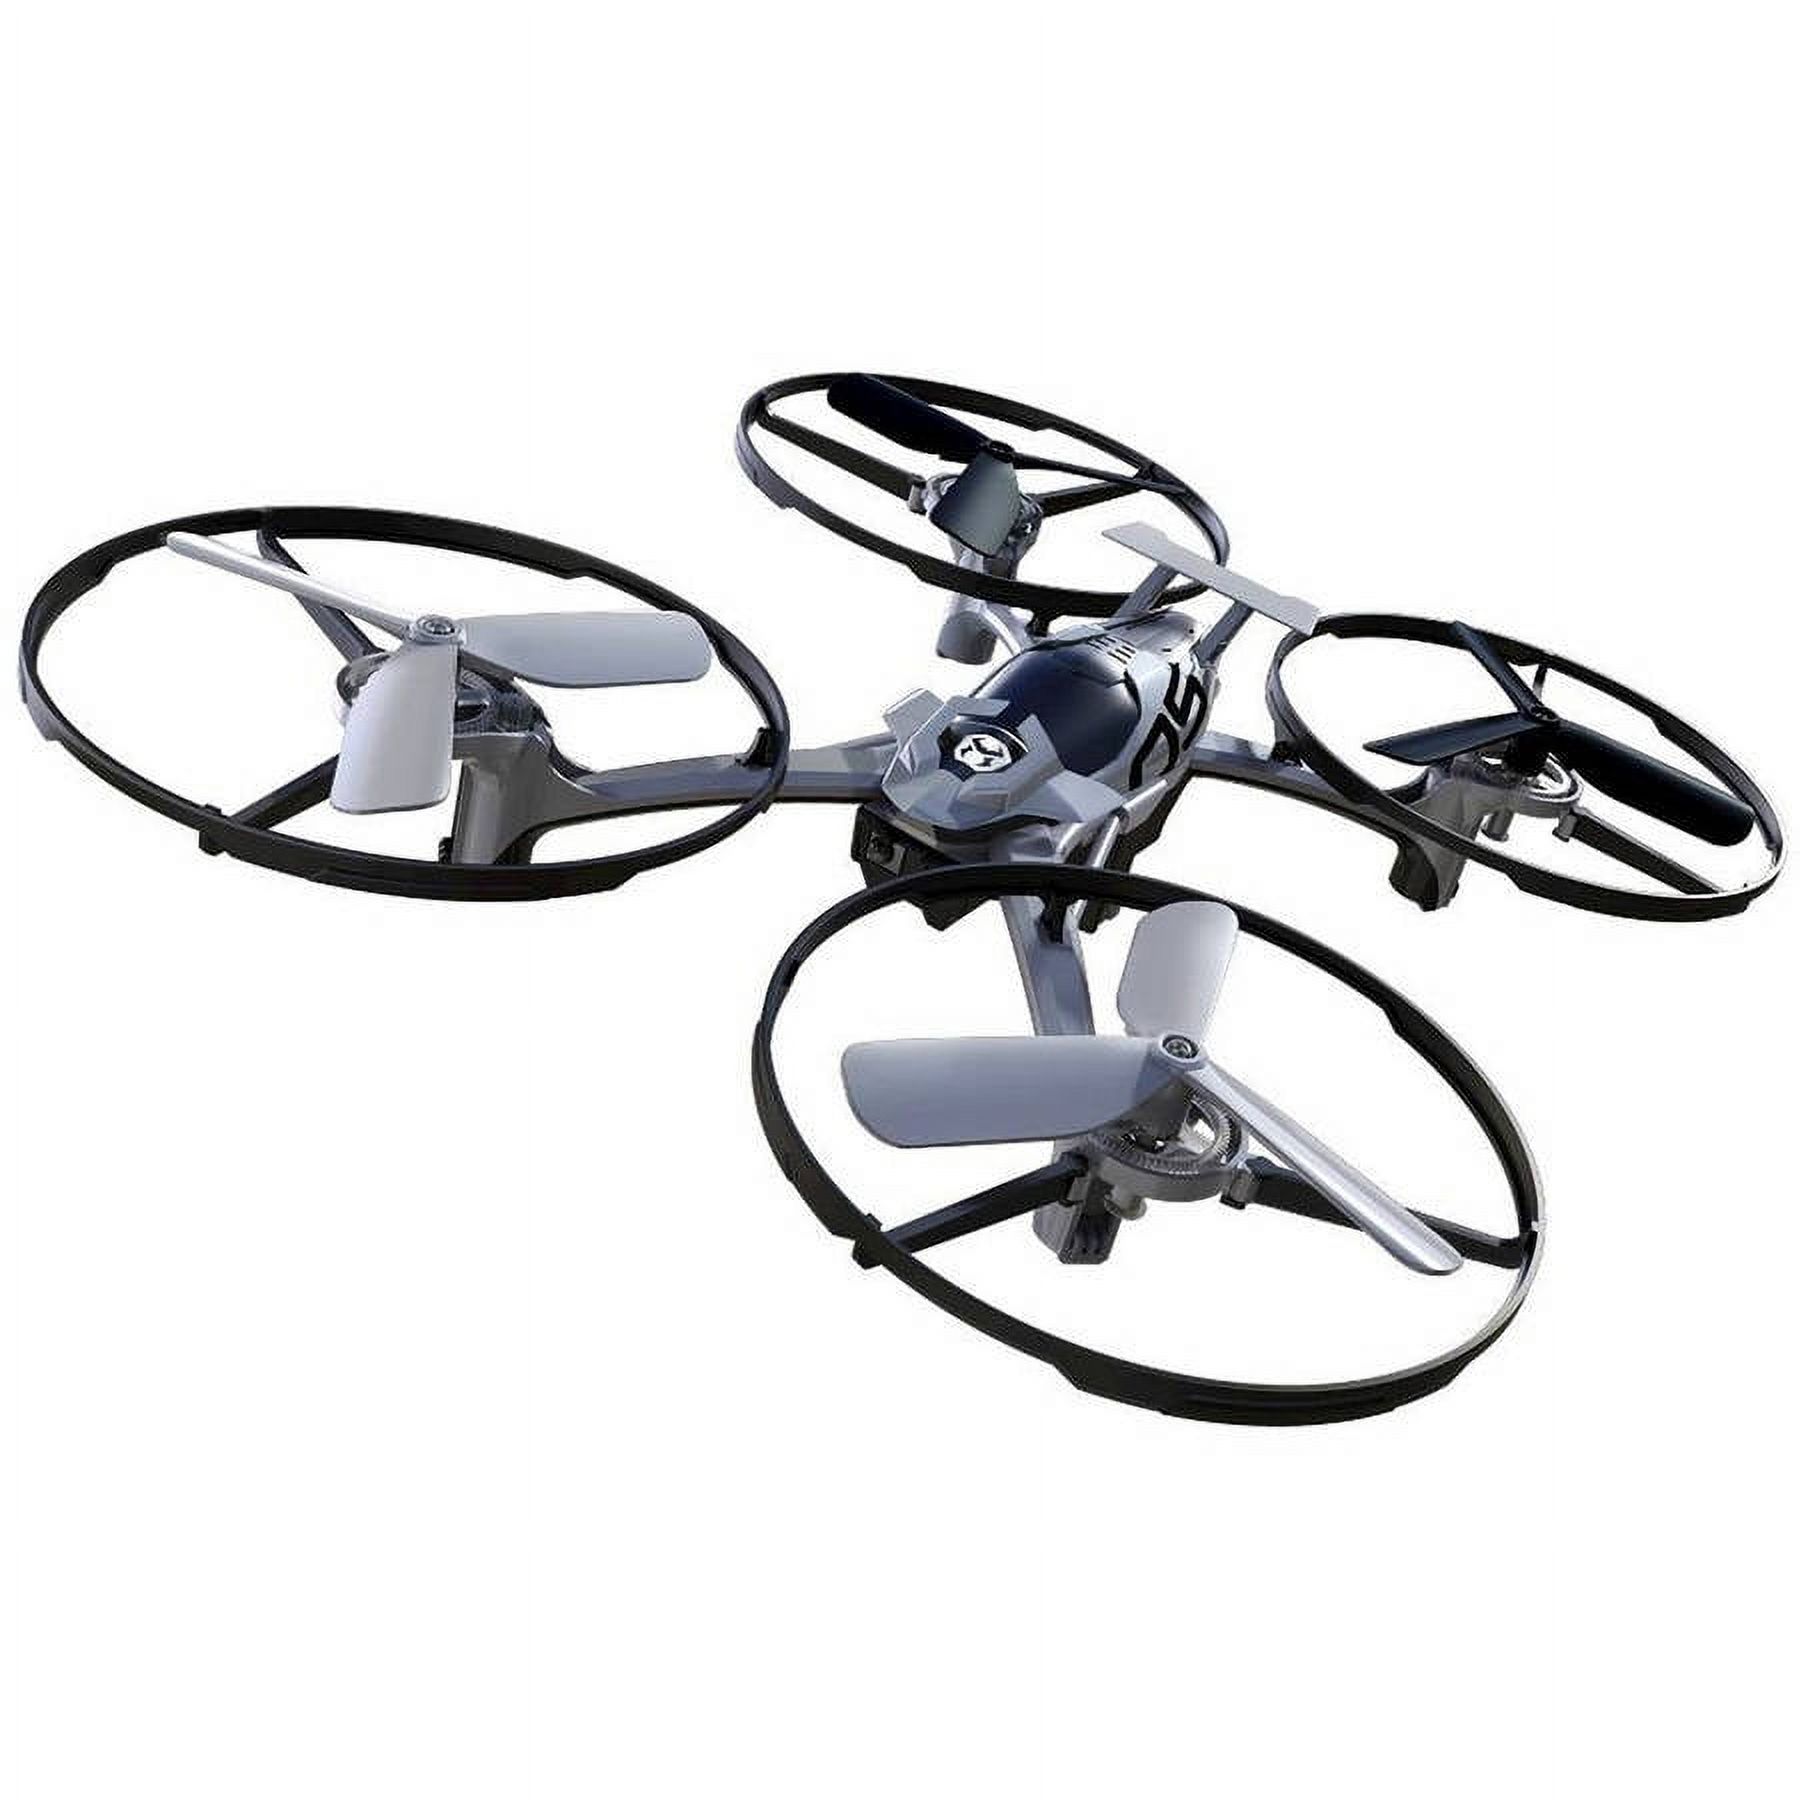 Sky Viper Hover Racer Drone - image 1 of 4